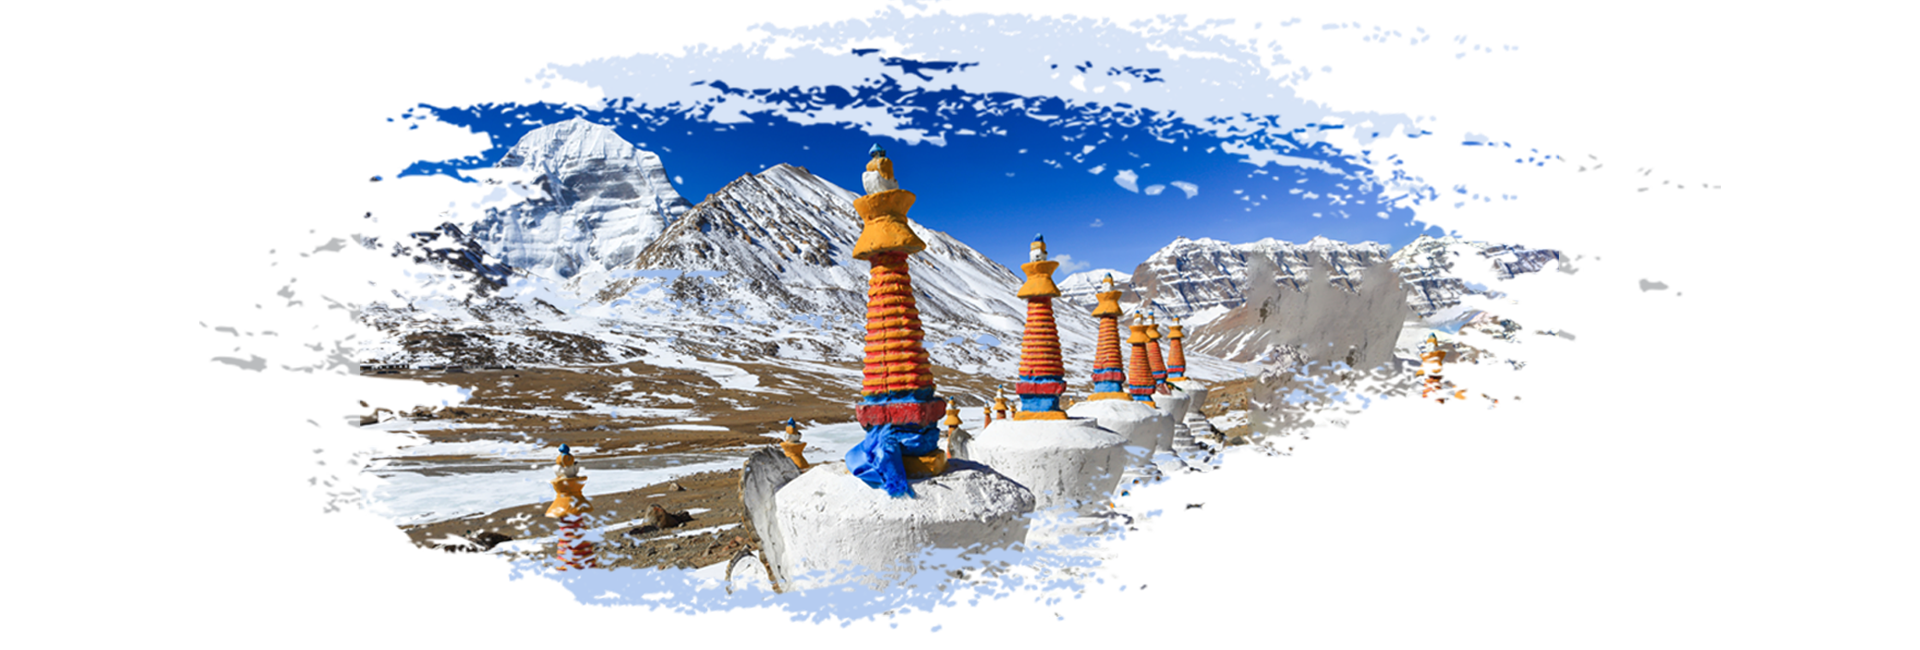 mount kailash tour package from hyderabad